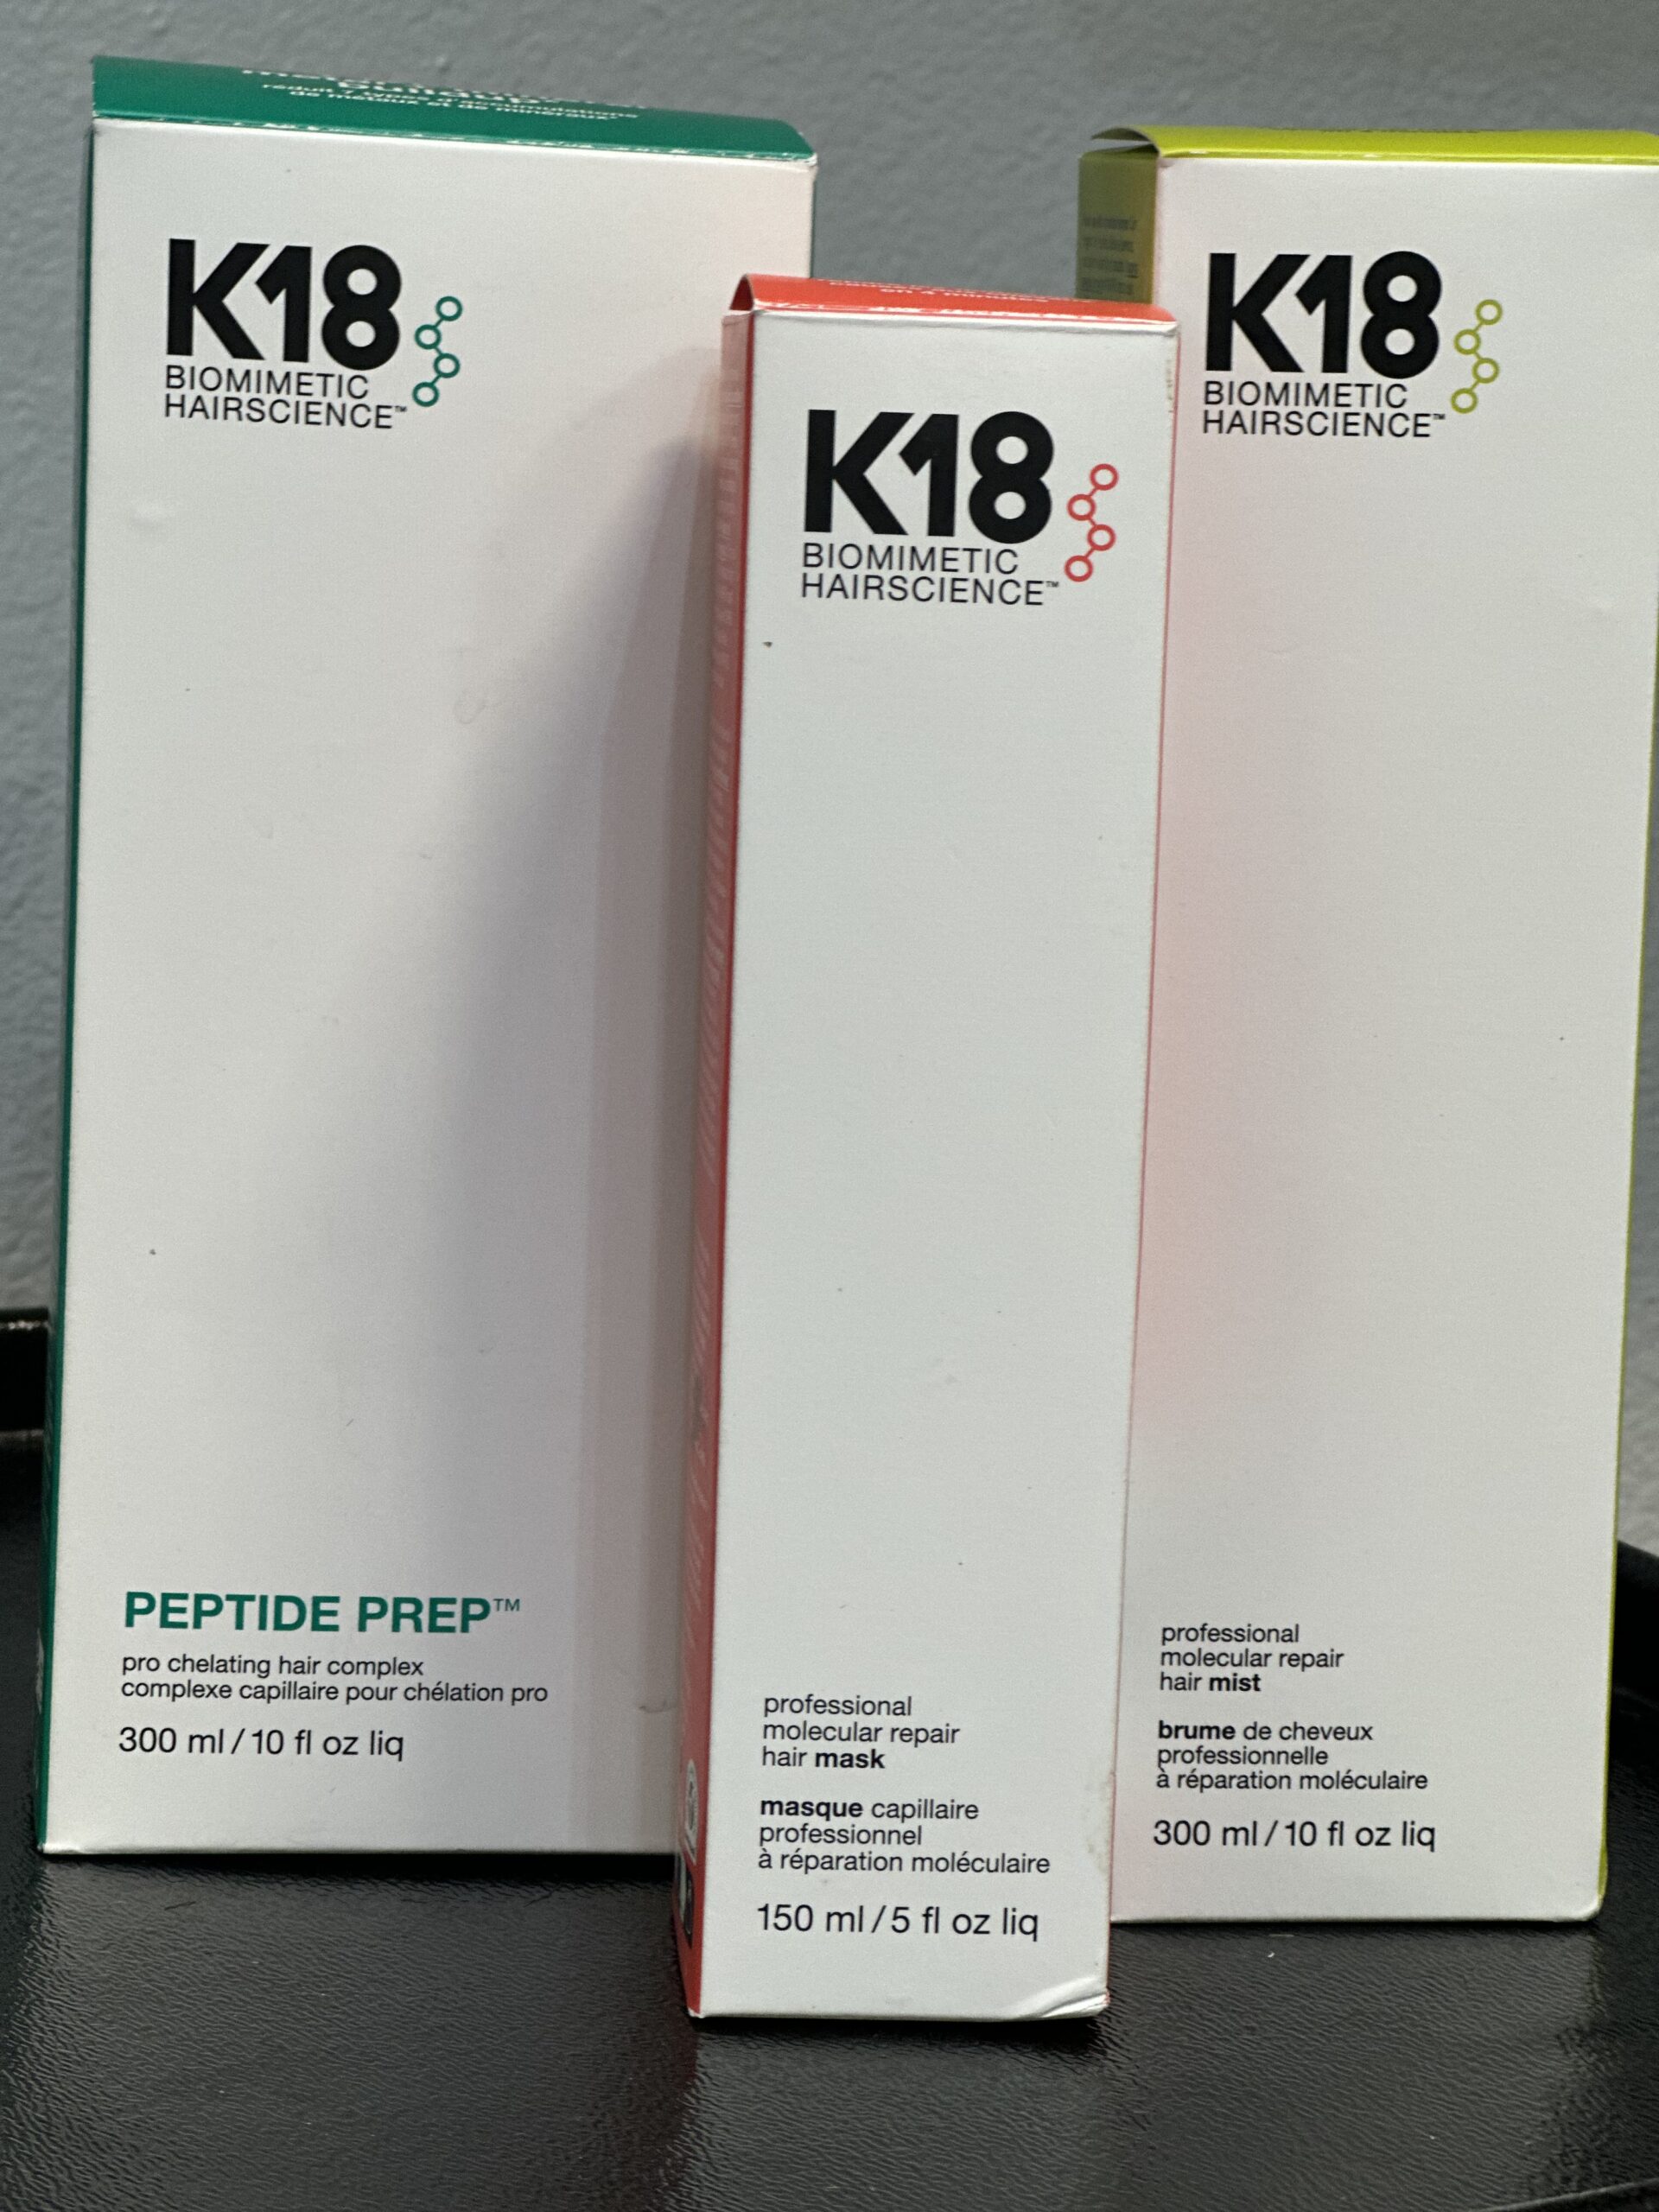 K18 Biomimetic Hair products